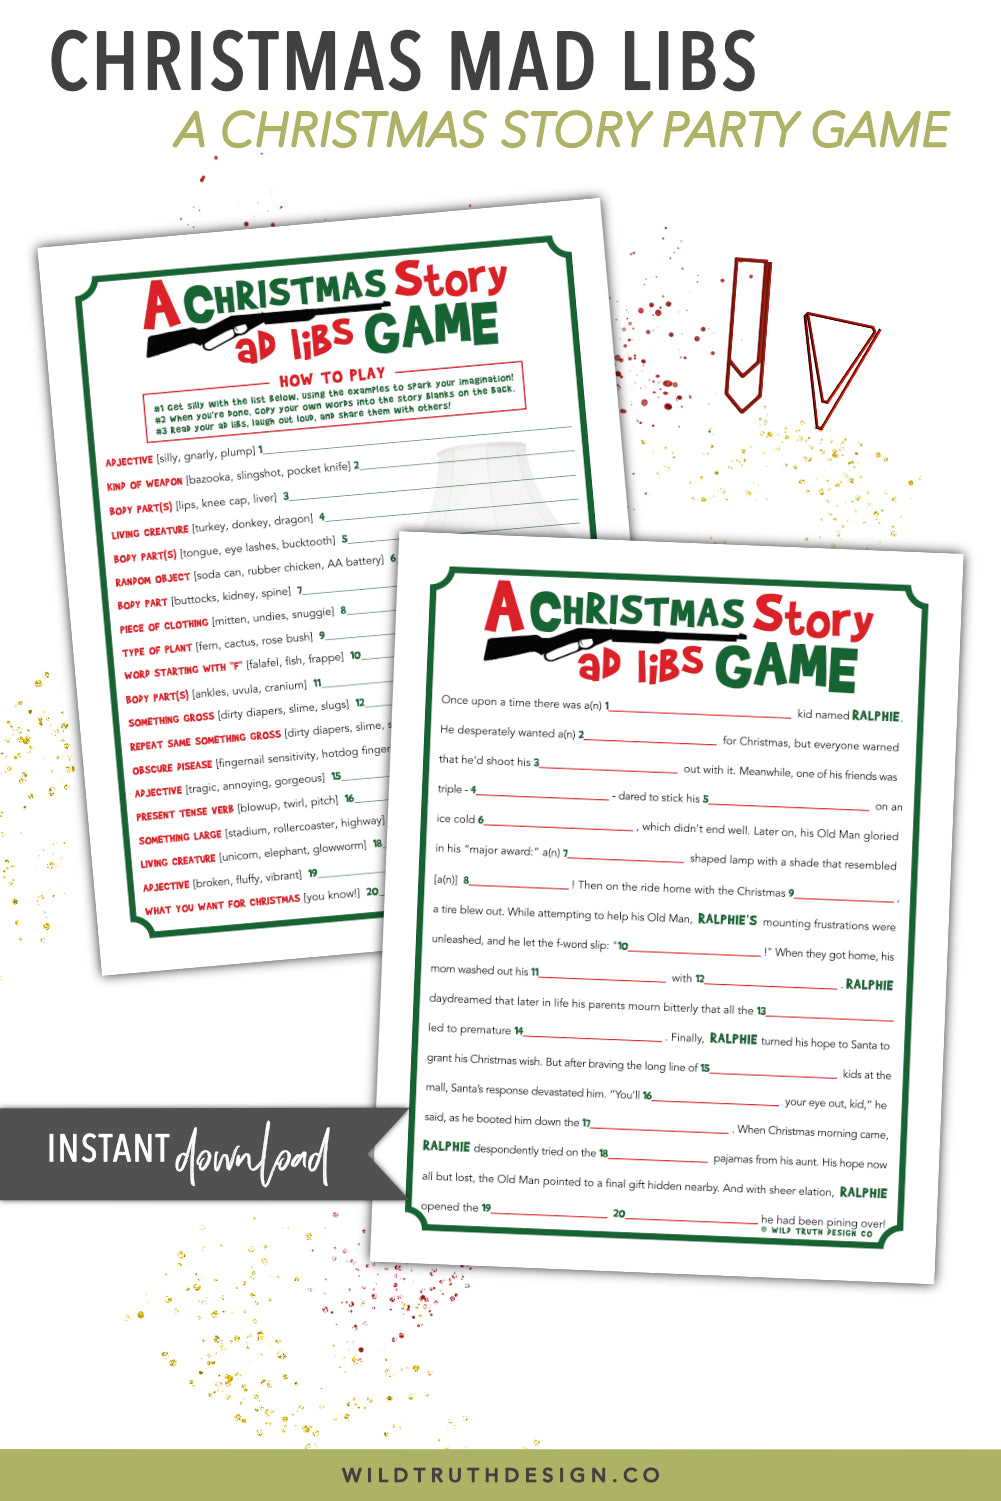 Christmas Mad Libs - A Christmas Story Party Game